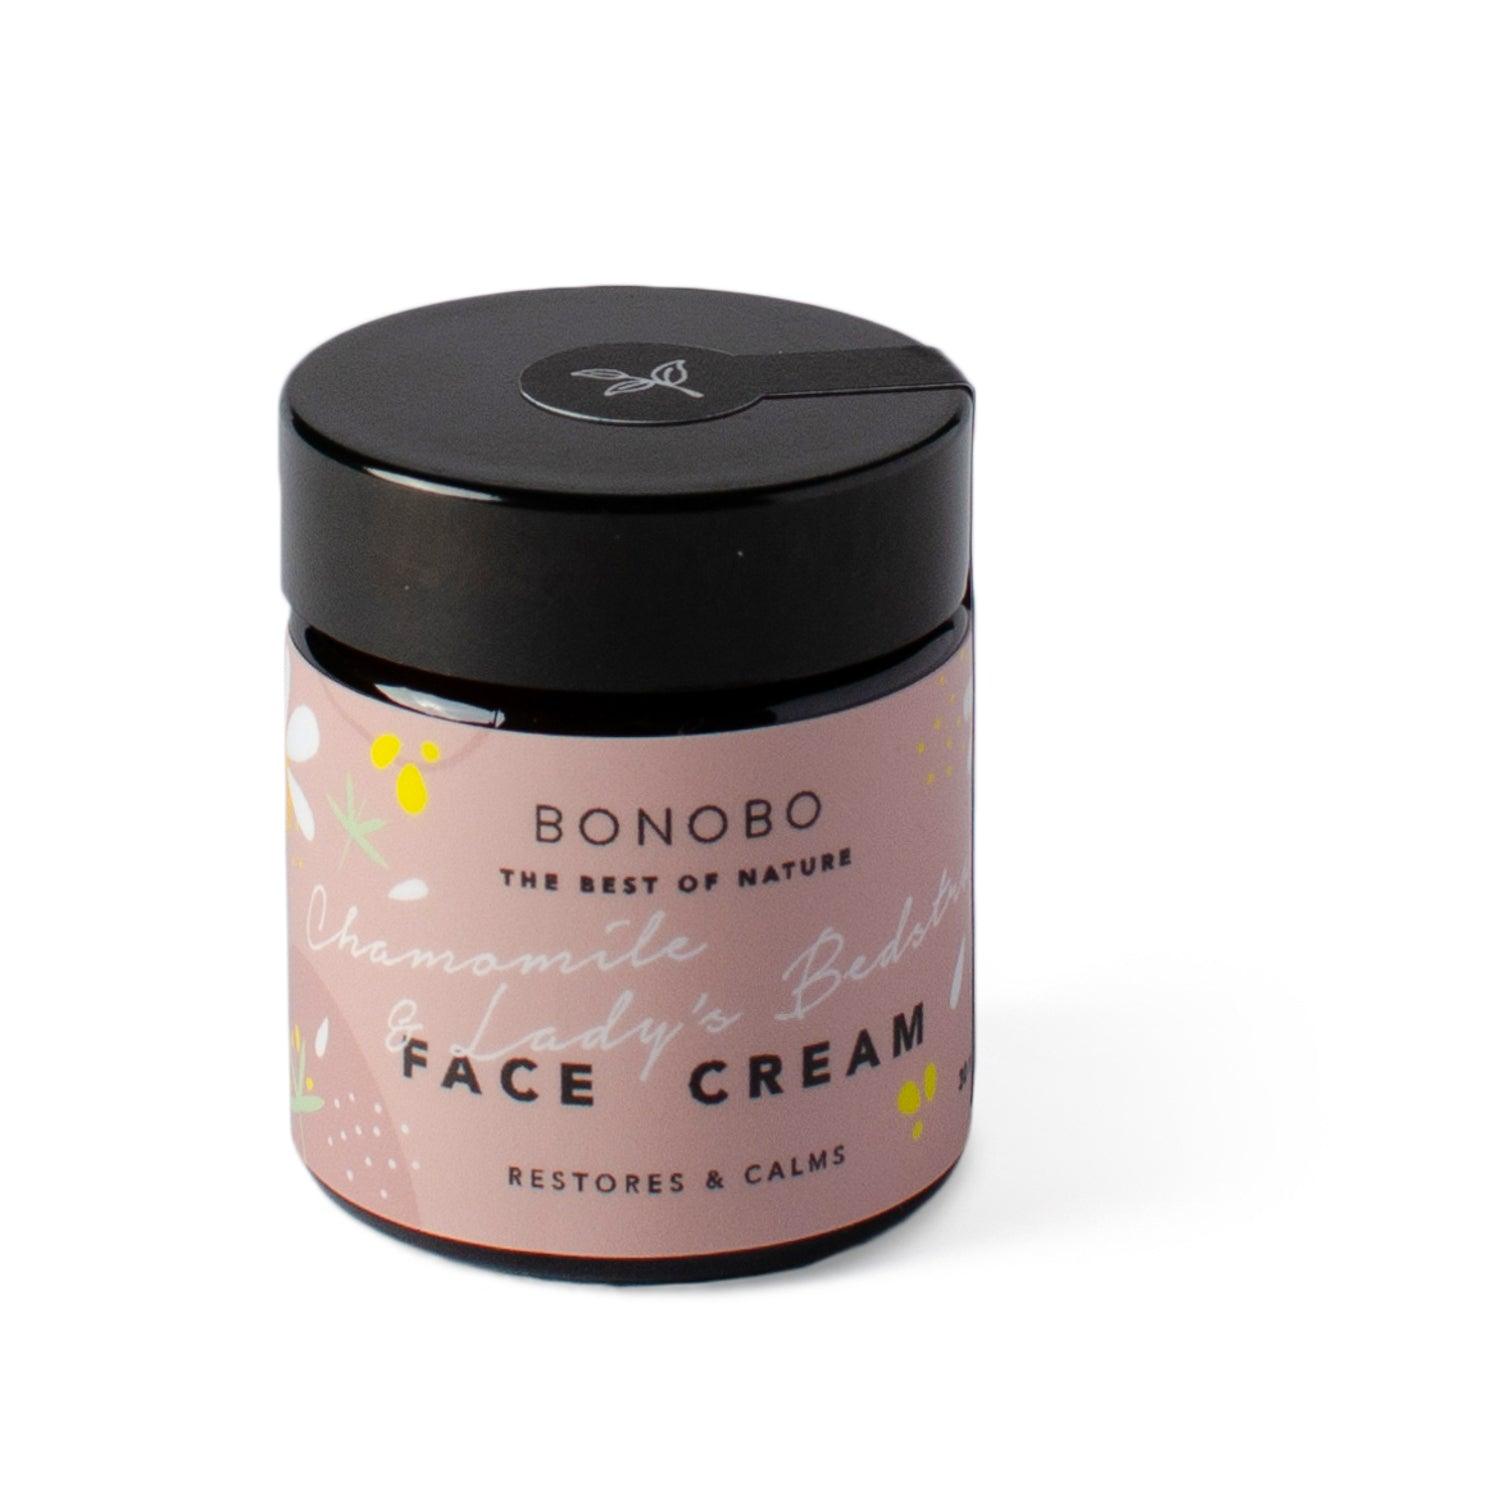 Chamomile & Lady’s Bedstraw Face Cream / Restores & Calms - RUUD Studios